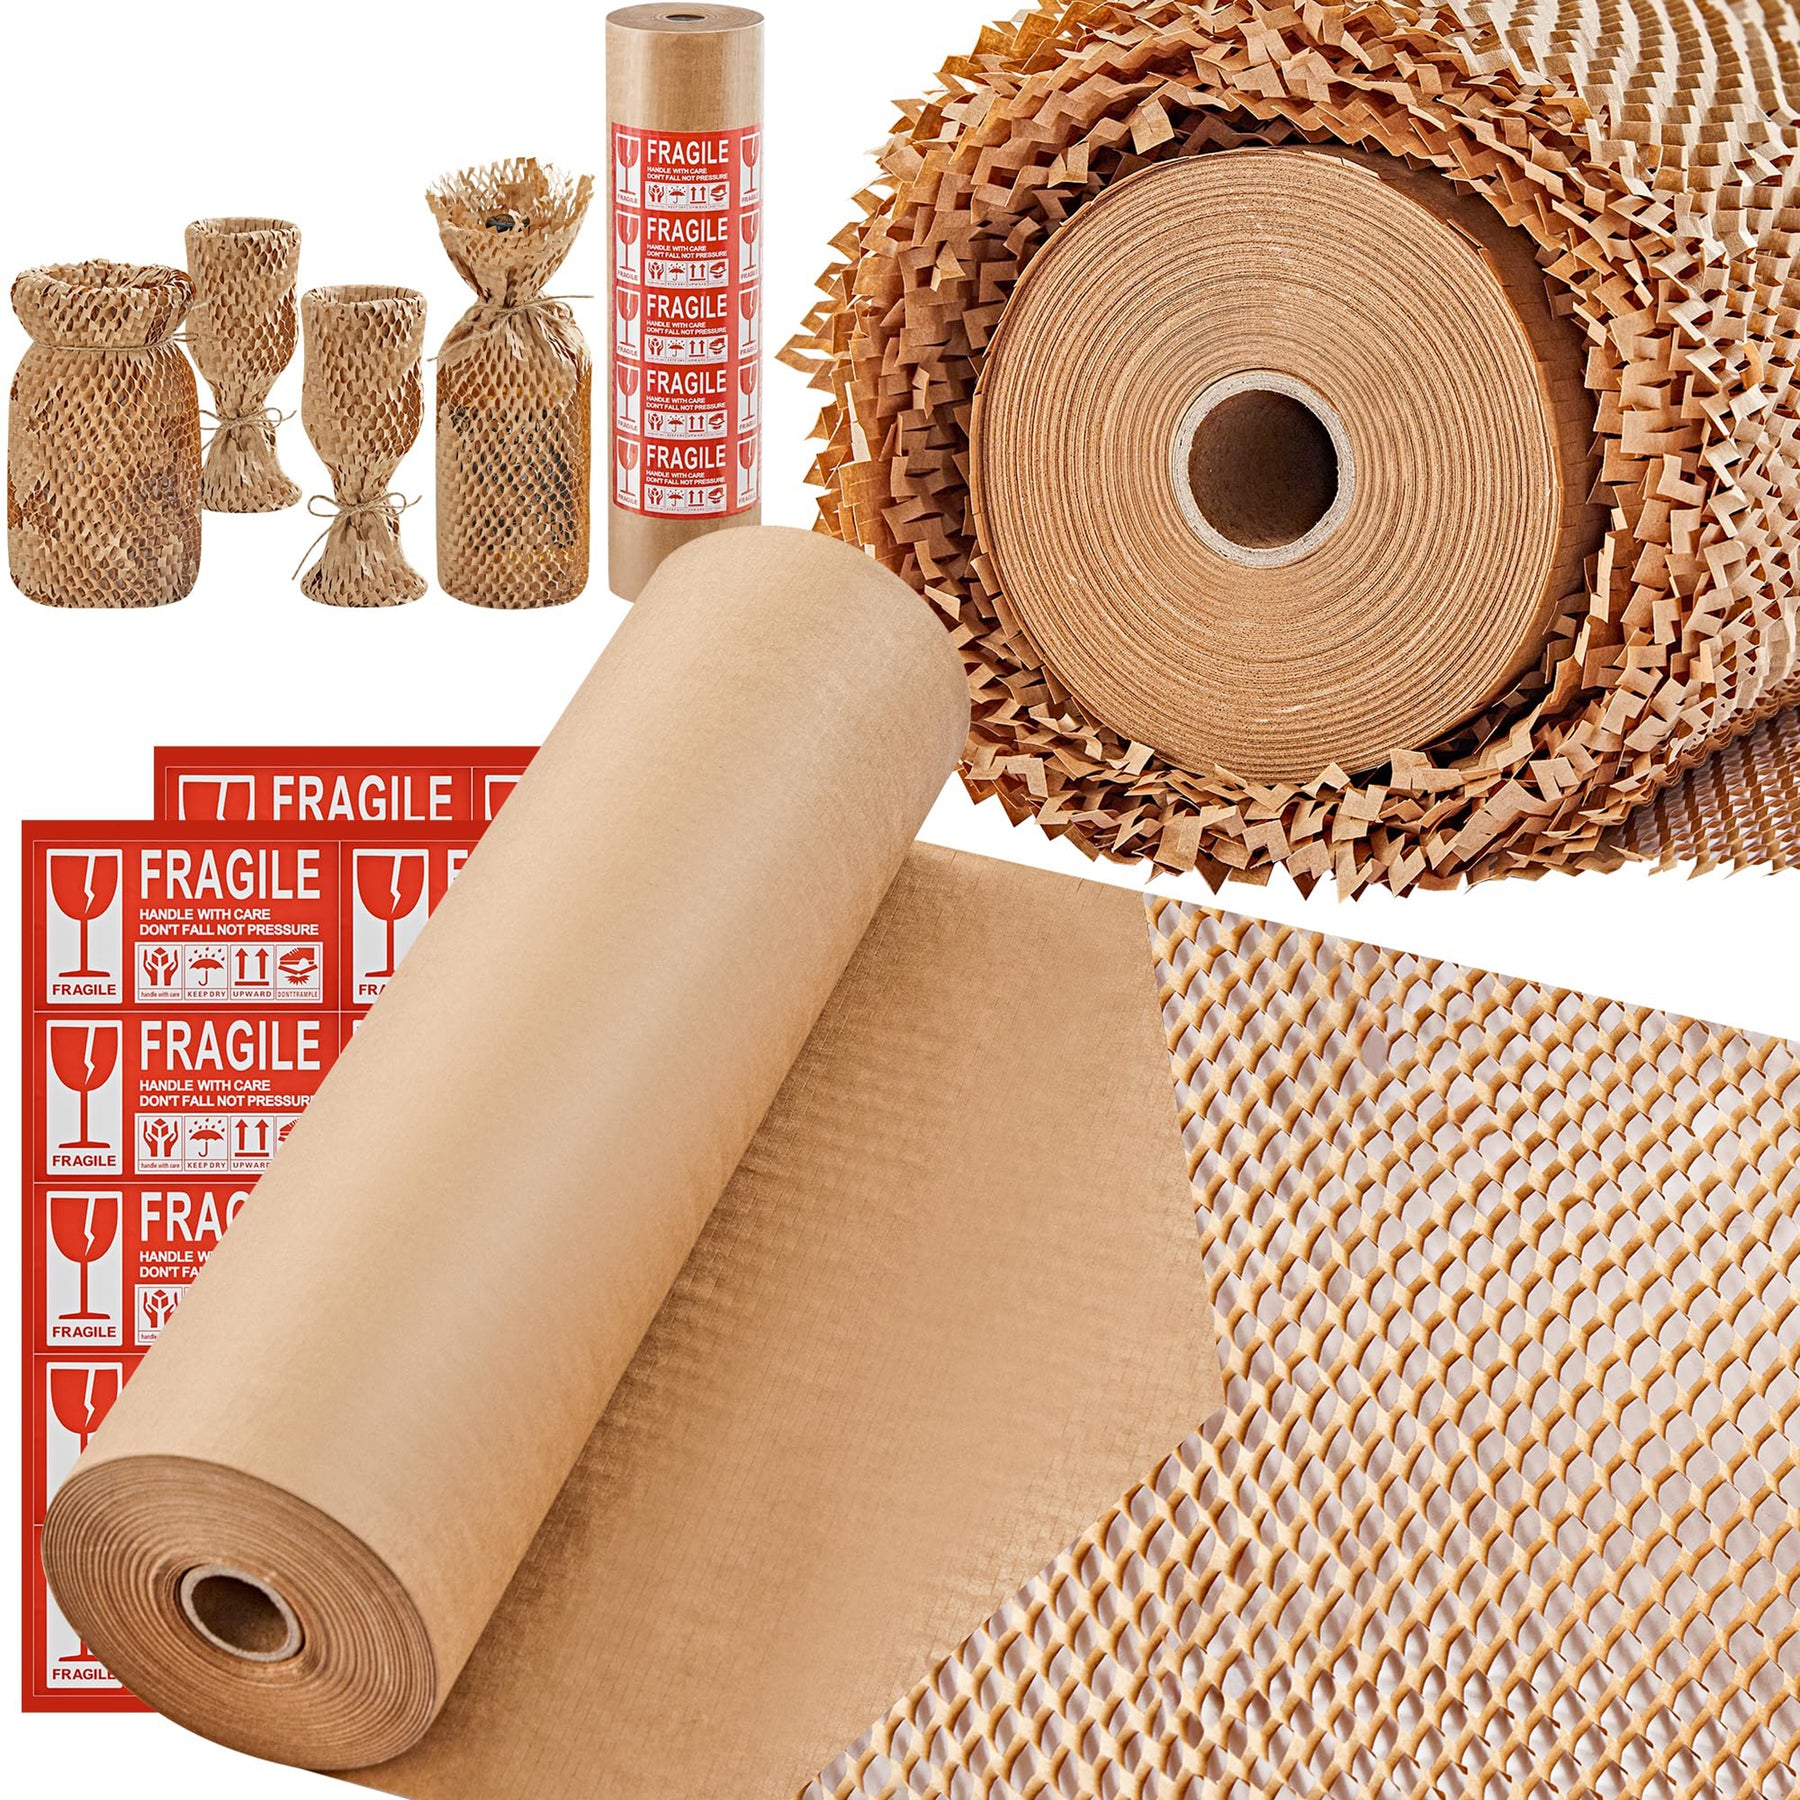 Honeycomb Packing Paper Wrap for Moving Shipping with 20 Fragile Sticker